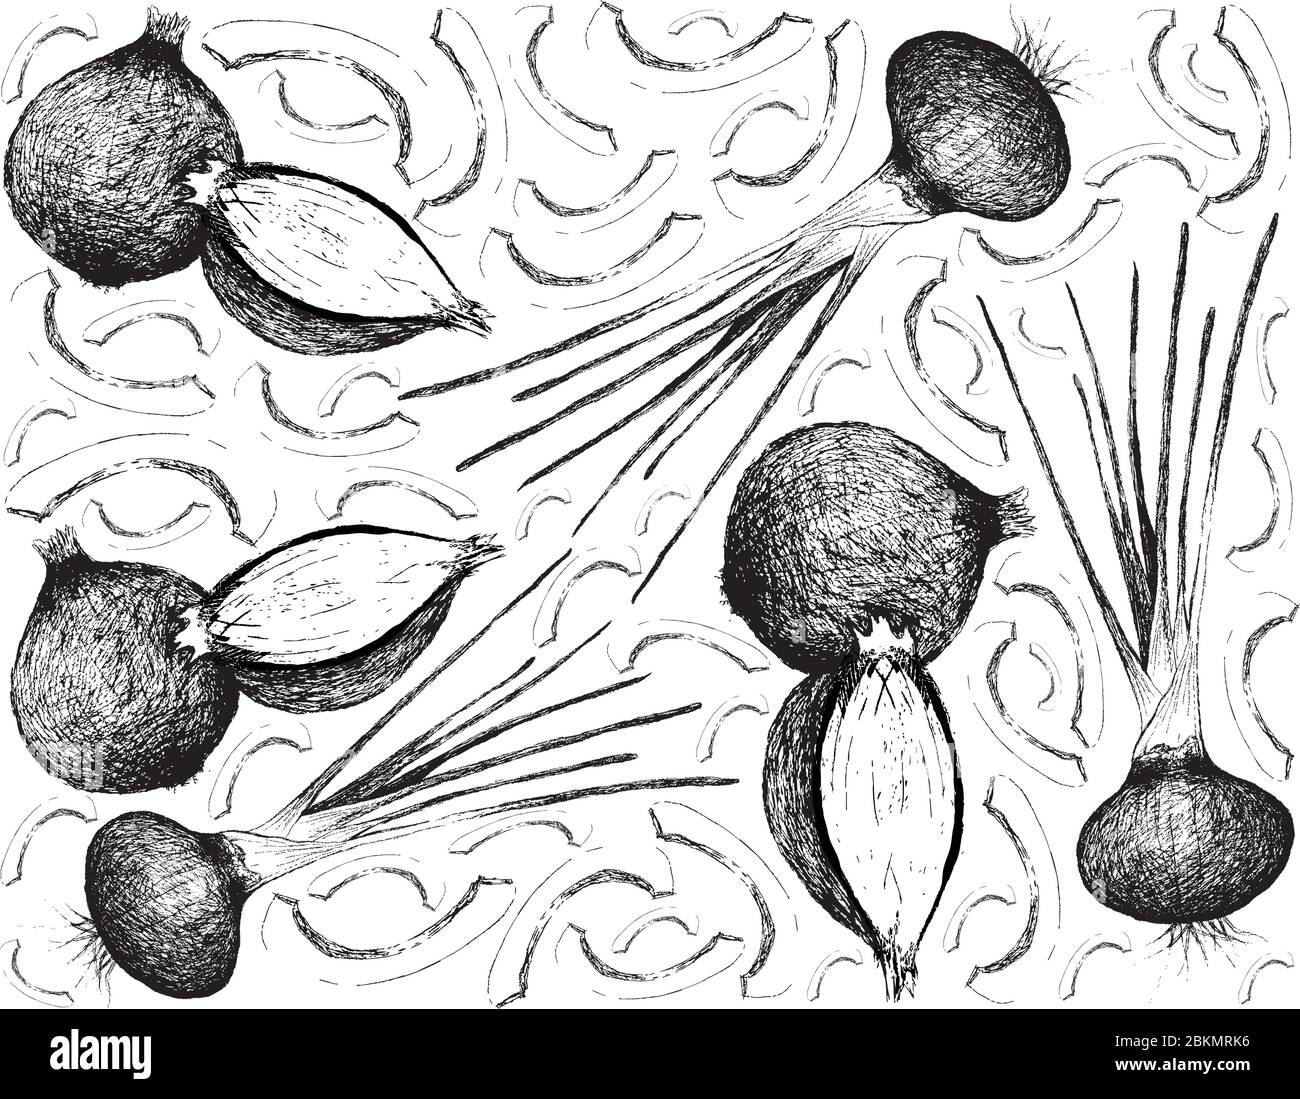 Herbal Plants, Illustration Hand Drawn Sketch of Fresh Shallots, Spanish Onions, or Red Onions Used for Seasoning in Cooking. Stock Vector